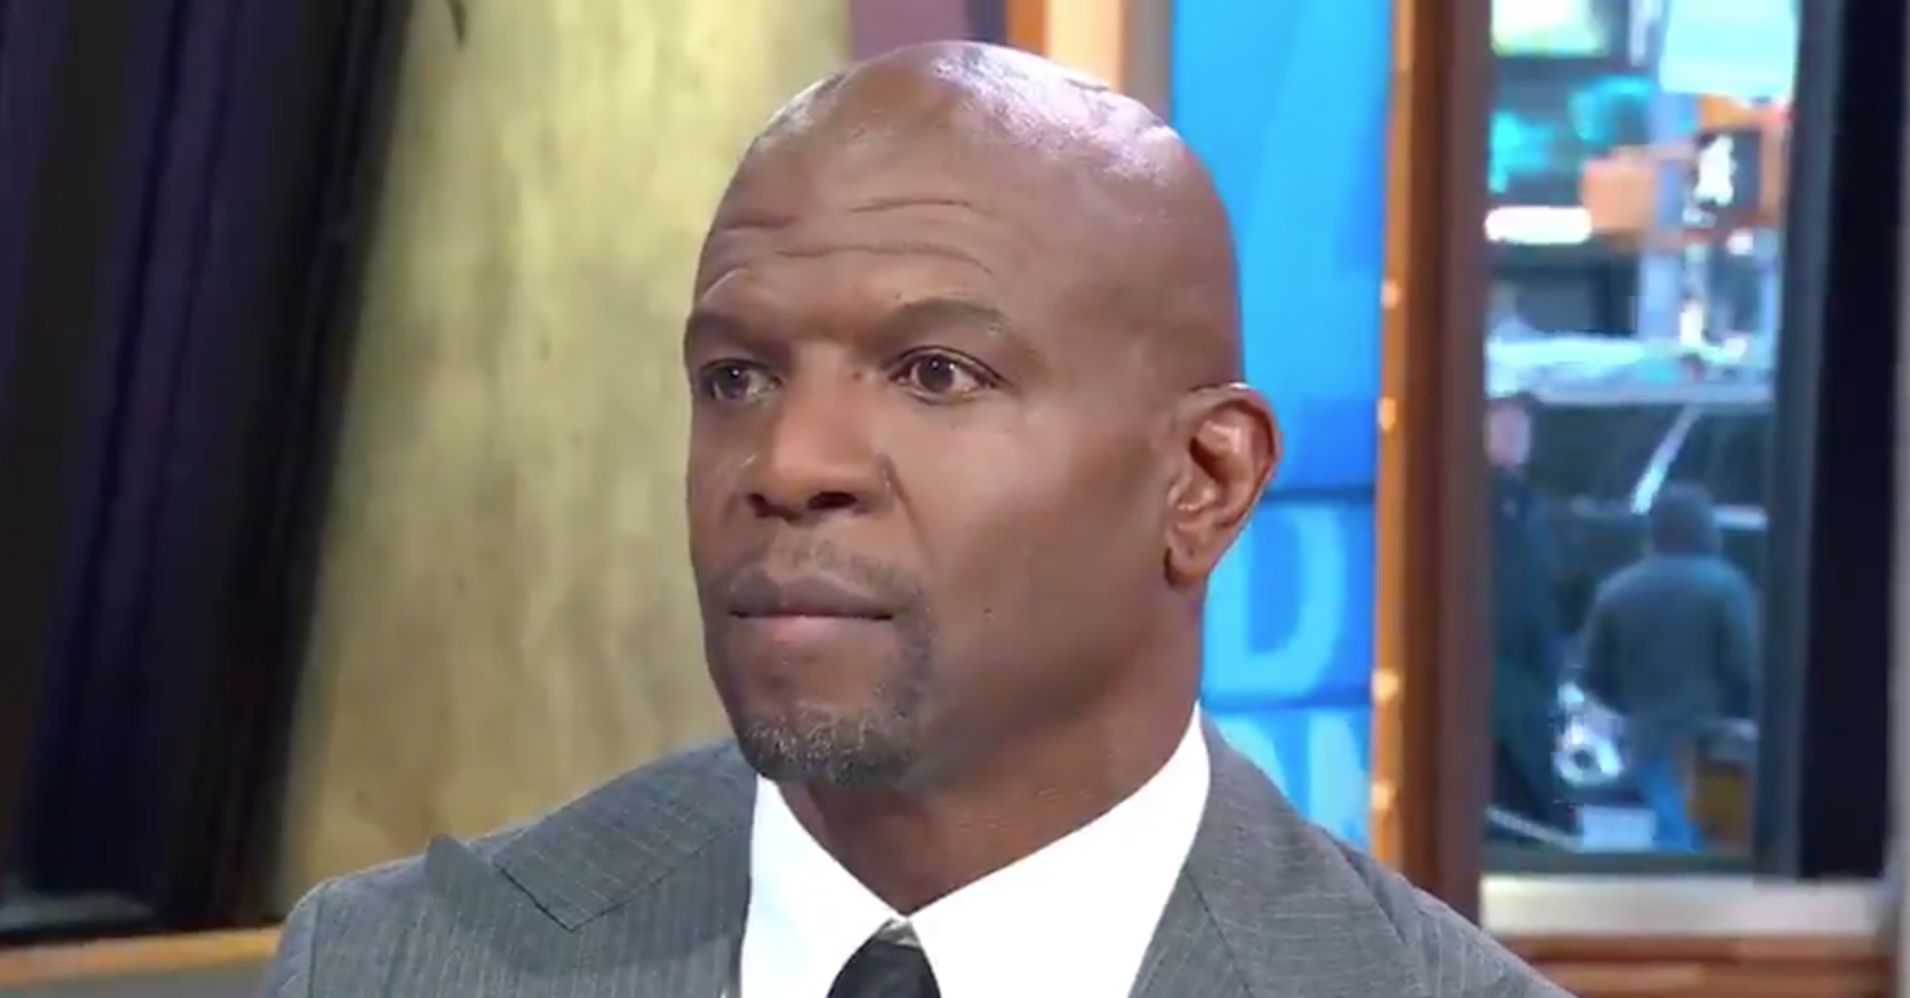 Terry Crews Speaks Out About Sexual Assault, Names Alleged Attacker ...